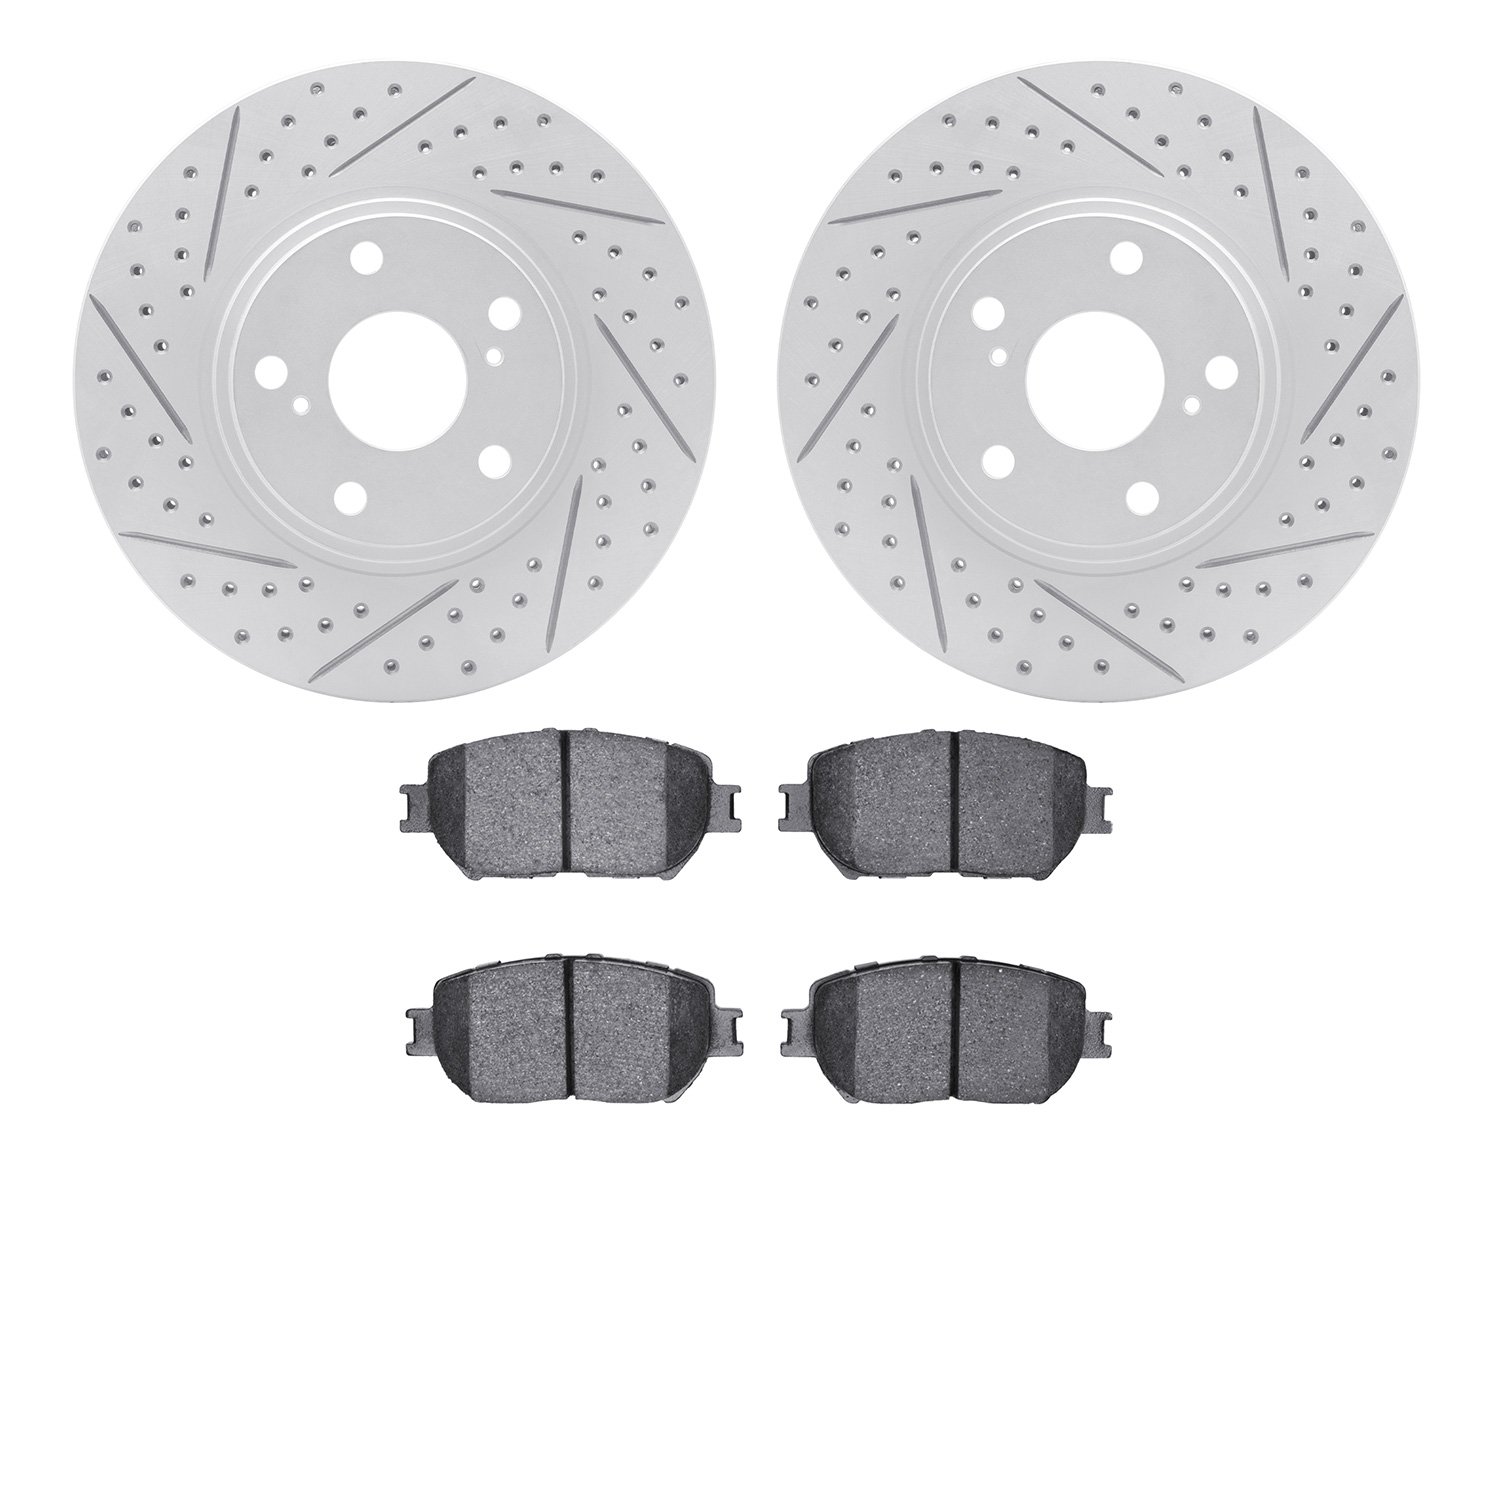 2502-76008 Geoperformance Drilled/Slotted Rotors w/5000 Advanced Brake Pads Kit, 2004-2004 Lexus/Toyota/Scion, Position: Front